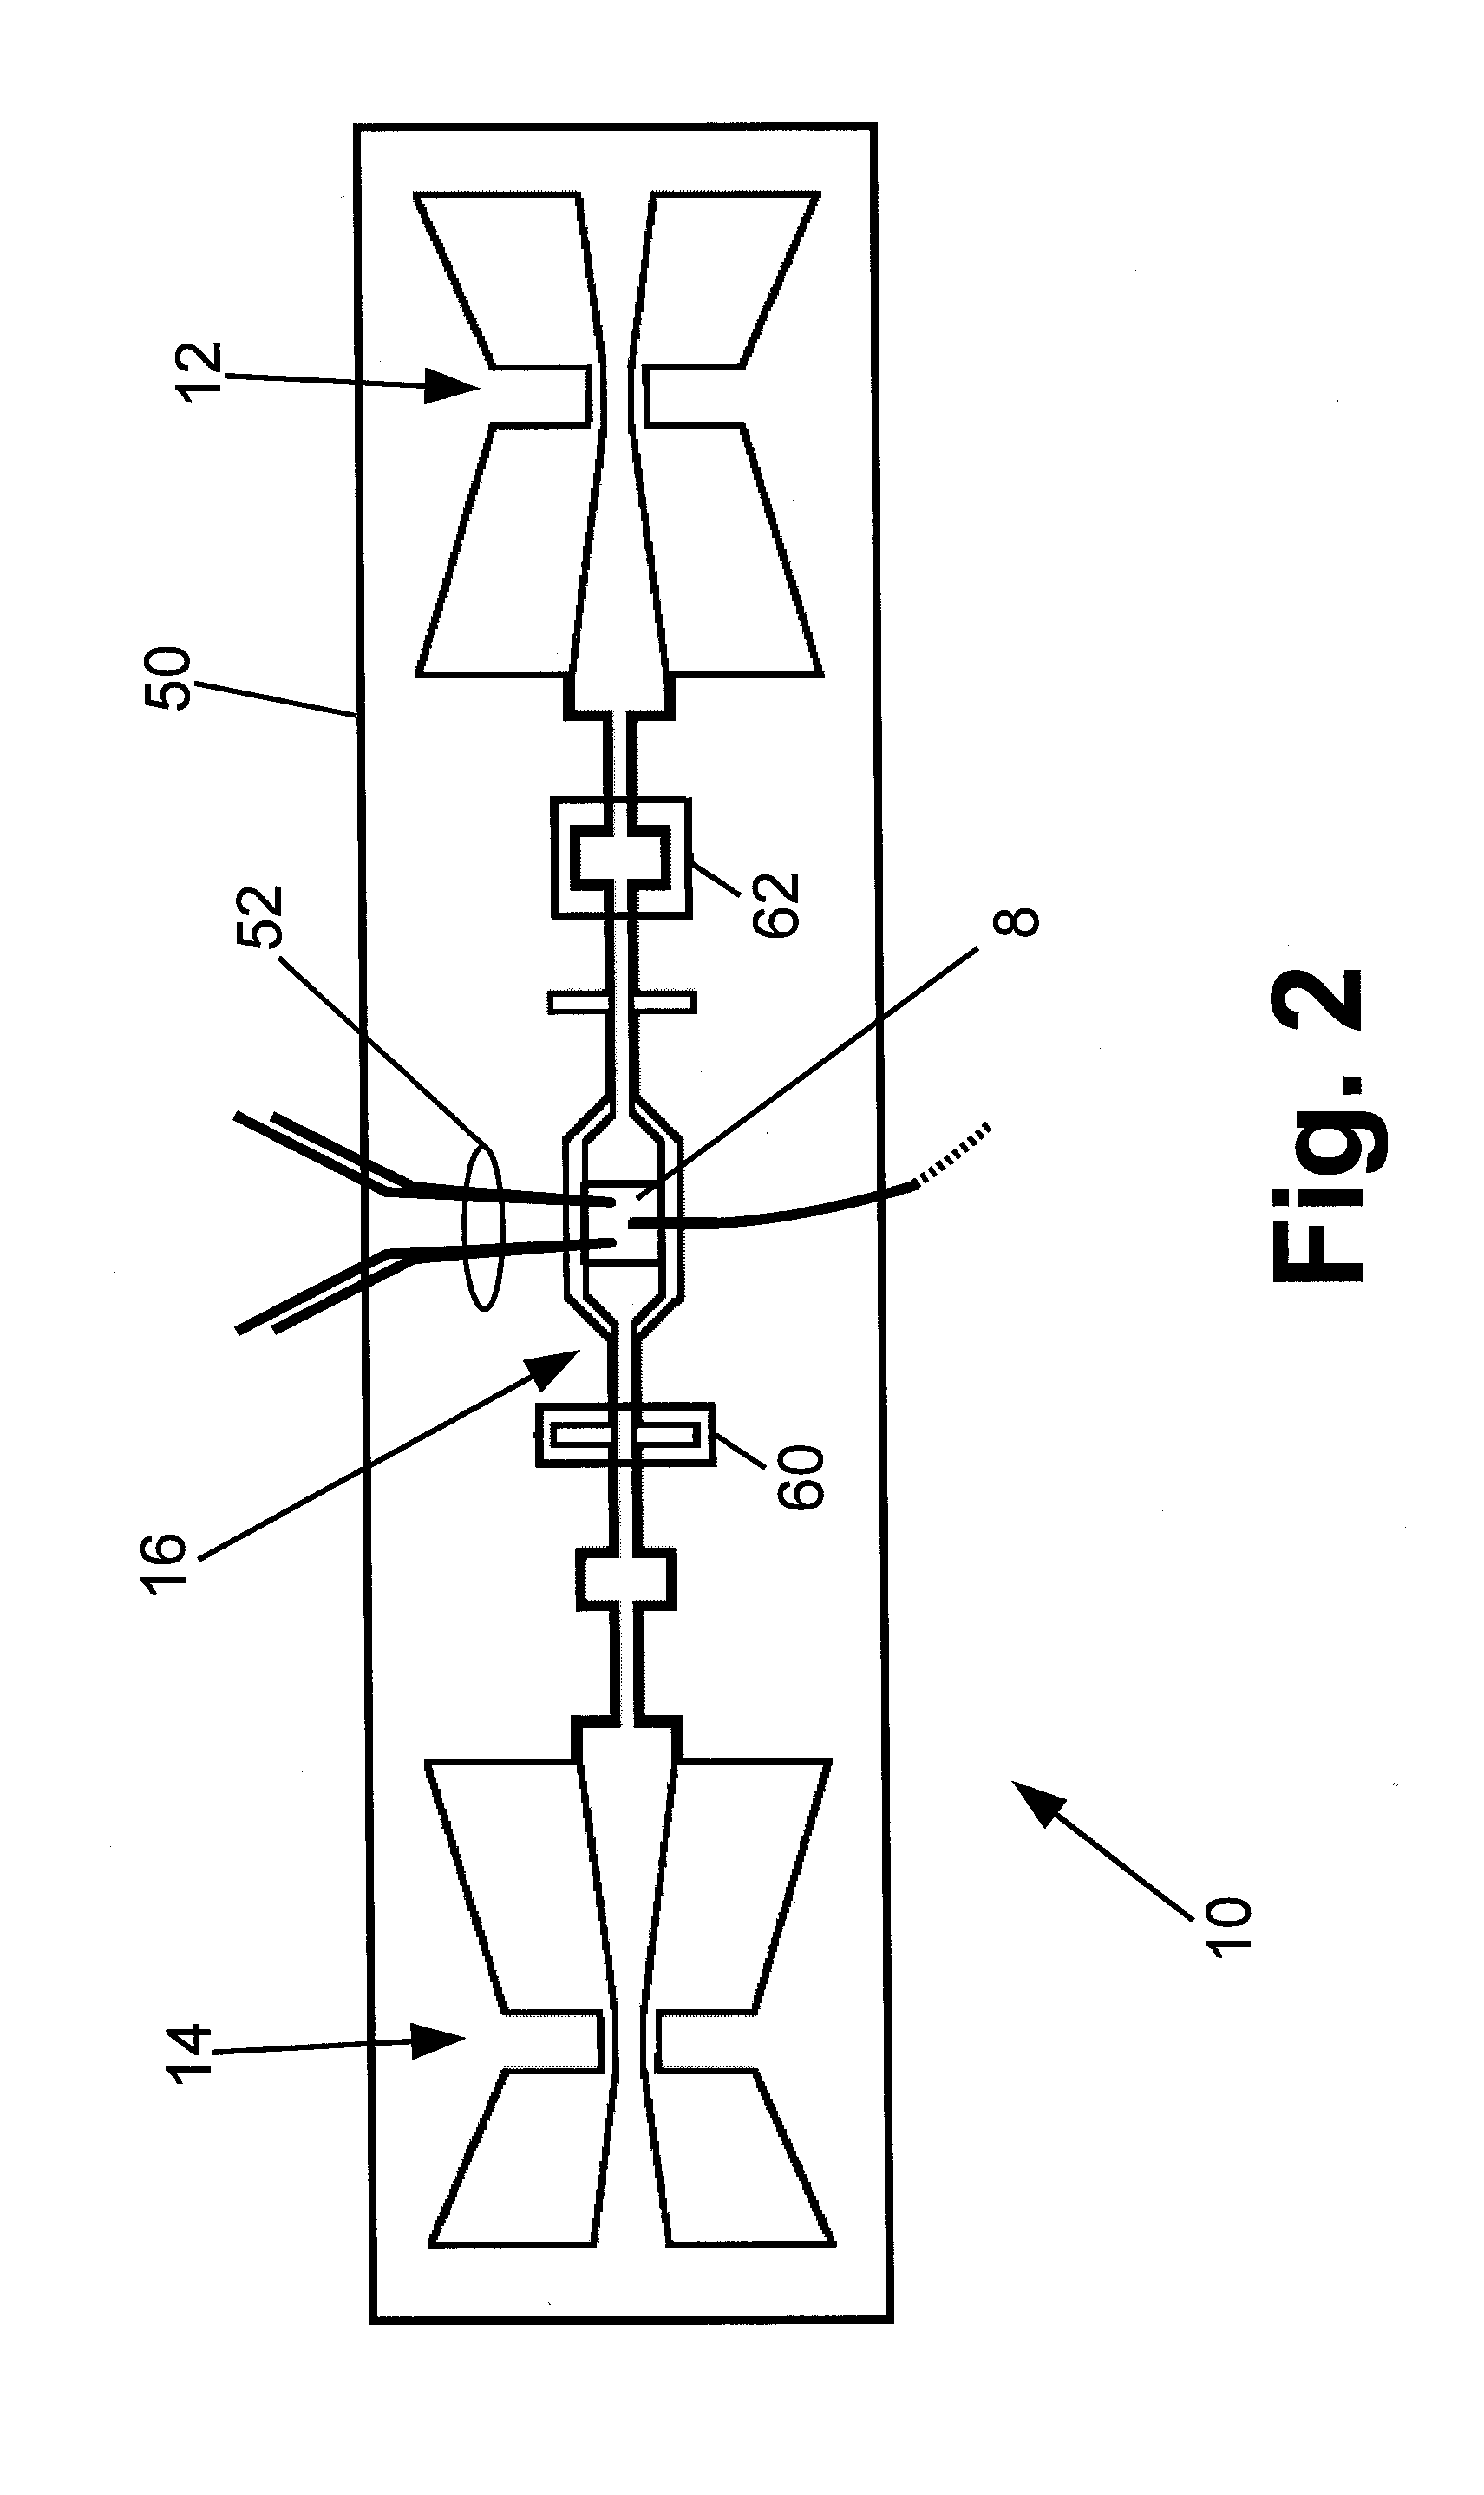 Non-contact probe measurement test bed for millimeter wave and terahertz circuits, integrated devices/components, systems for spectroscopy using sub-wavelength-size-samples